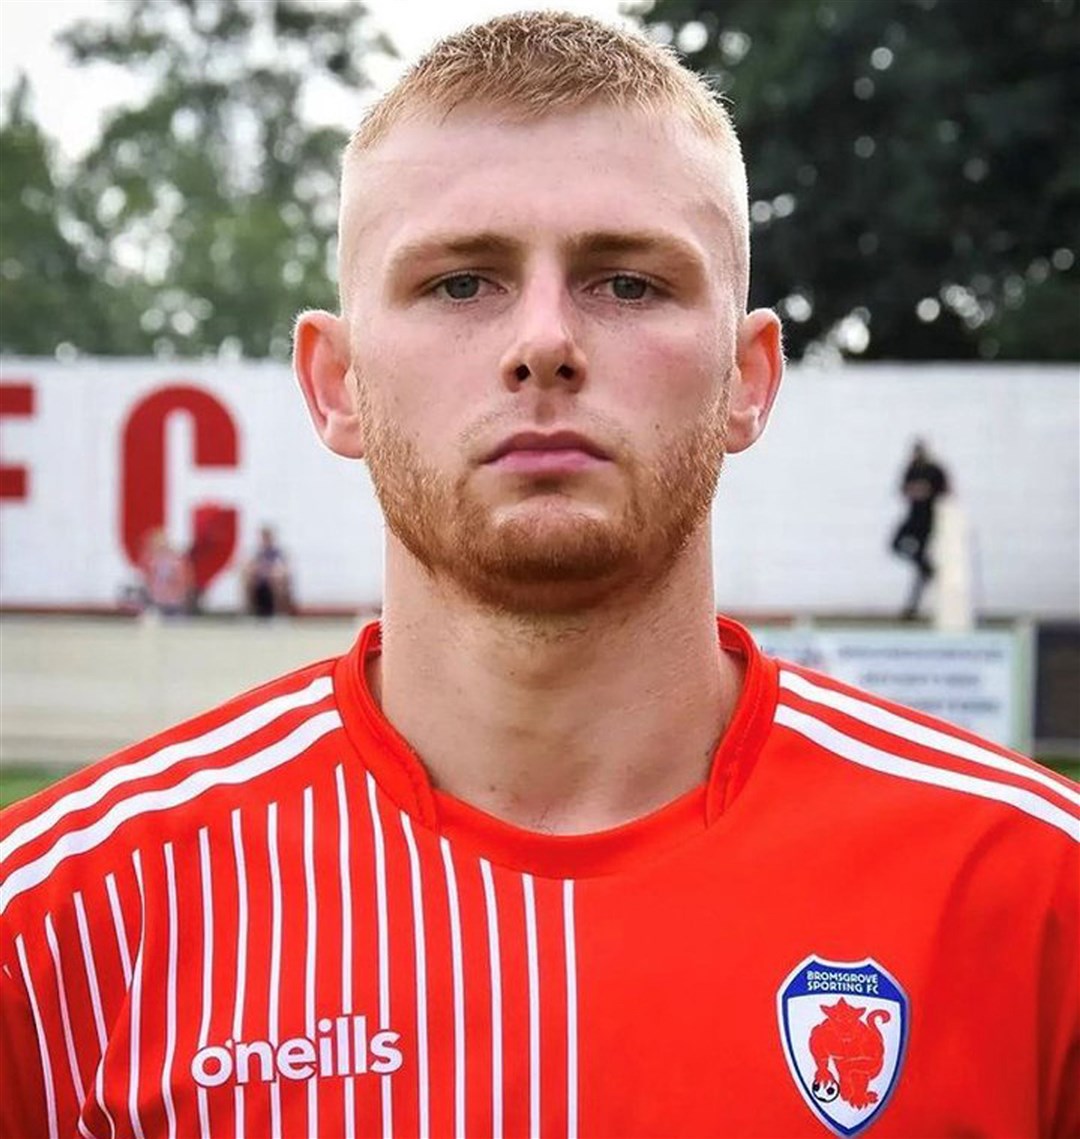 Cody Fisher played for Bromsgrove Sporting FC and was 23 when he was stabbed to death in Crane on Boxing Day (Chris Jepson/Bromsgrove Sporting FC/PA)